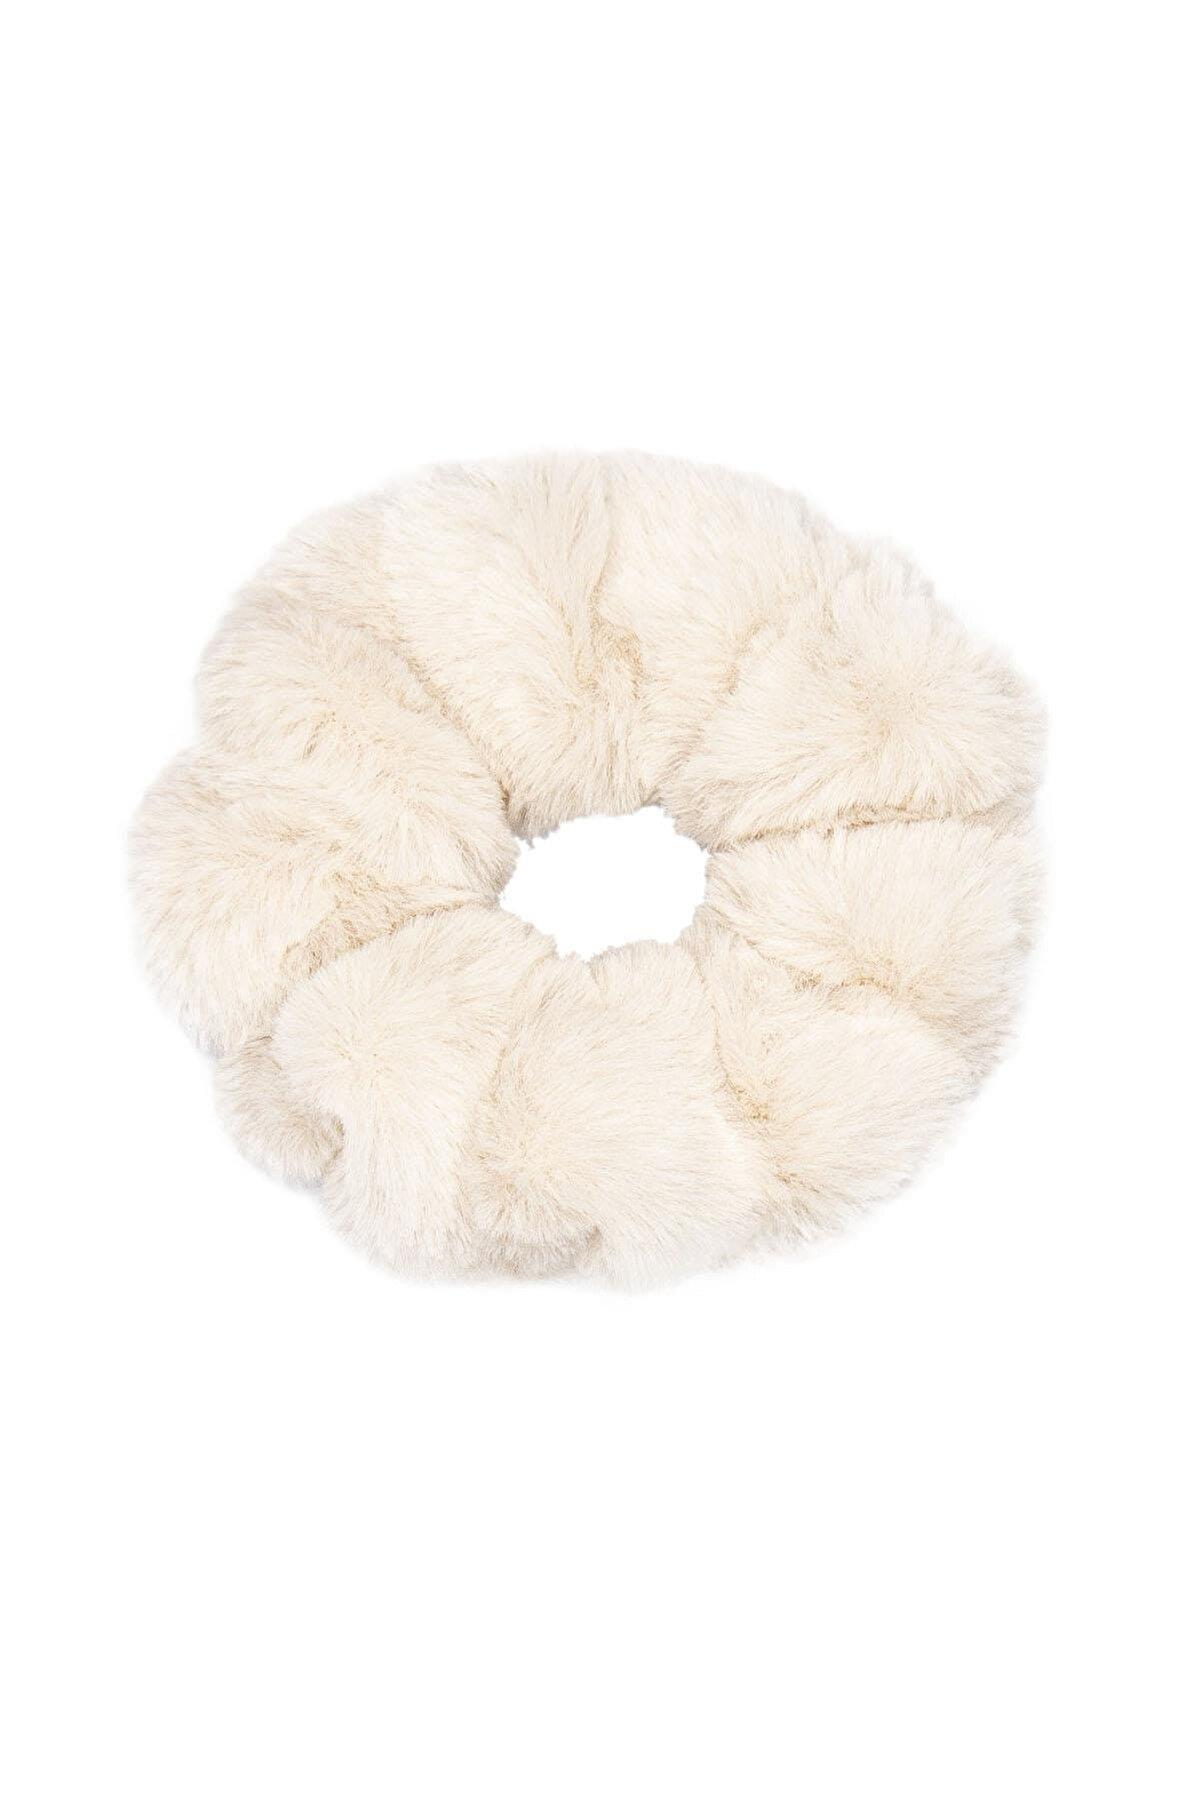 A model wears NSV11156 - Plush Buckle - Beige, wholesale Hairclip of Nesvay to display at Lonca